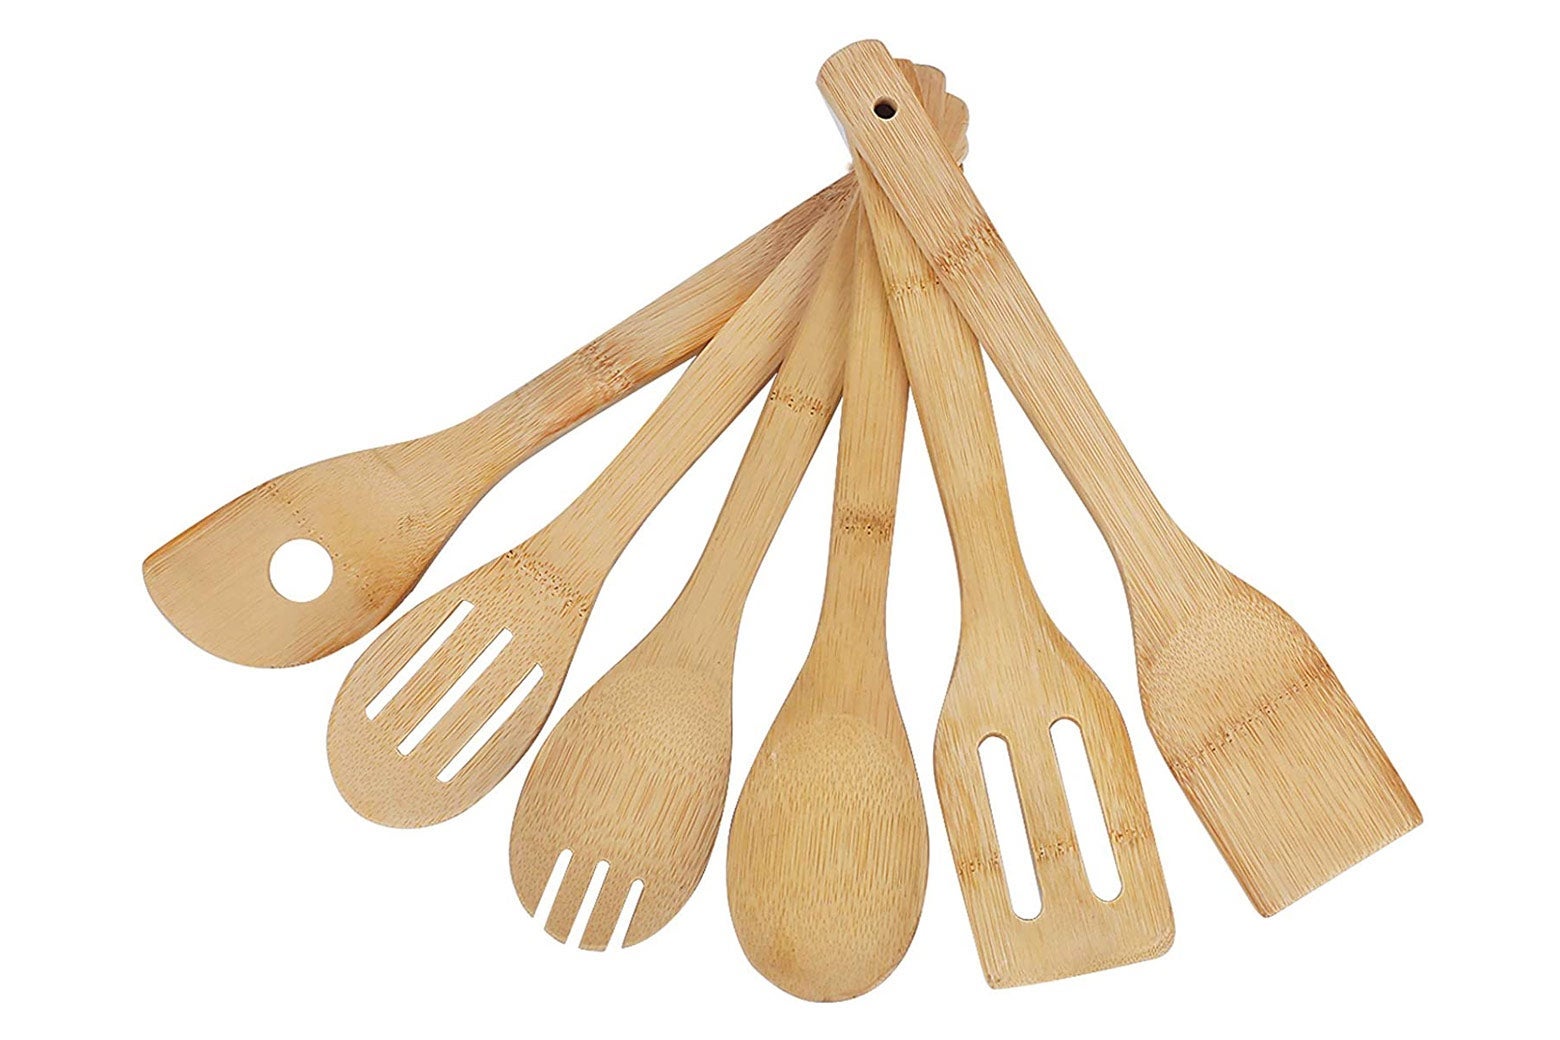 A variety pack of bamboo utensils.